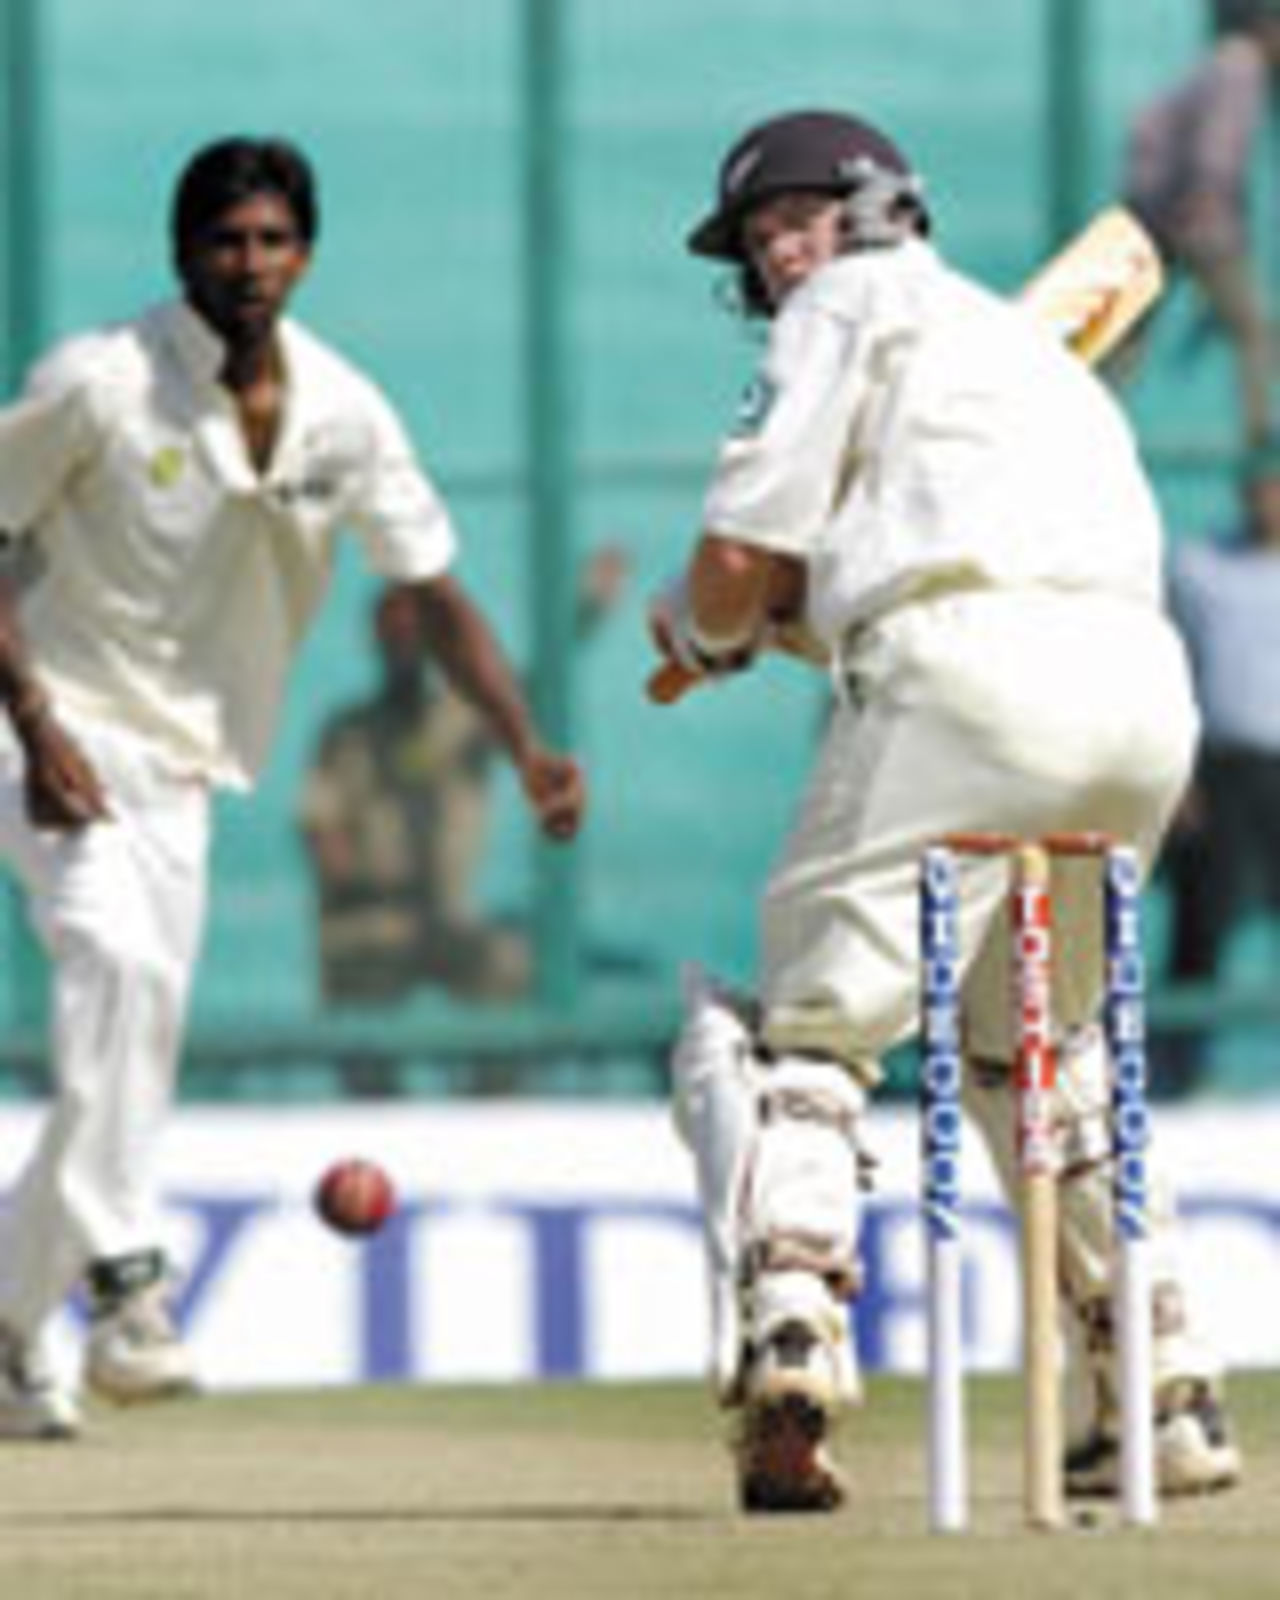 Lou Vincent flicks L Balaji as New Zealand's openers pile on the runs, New Zealand v India, 2nd Test, Mohali, 1st Day, October 16, 2003